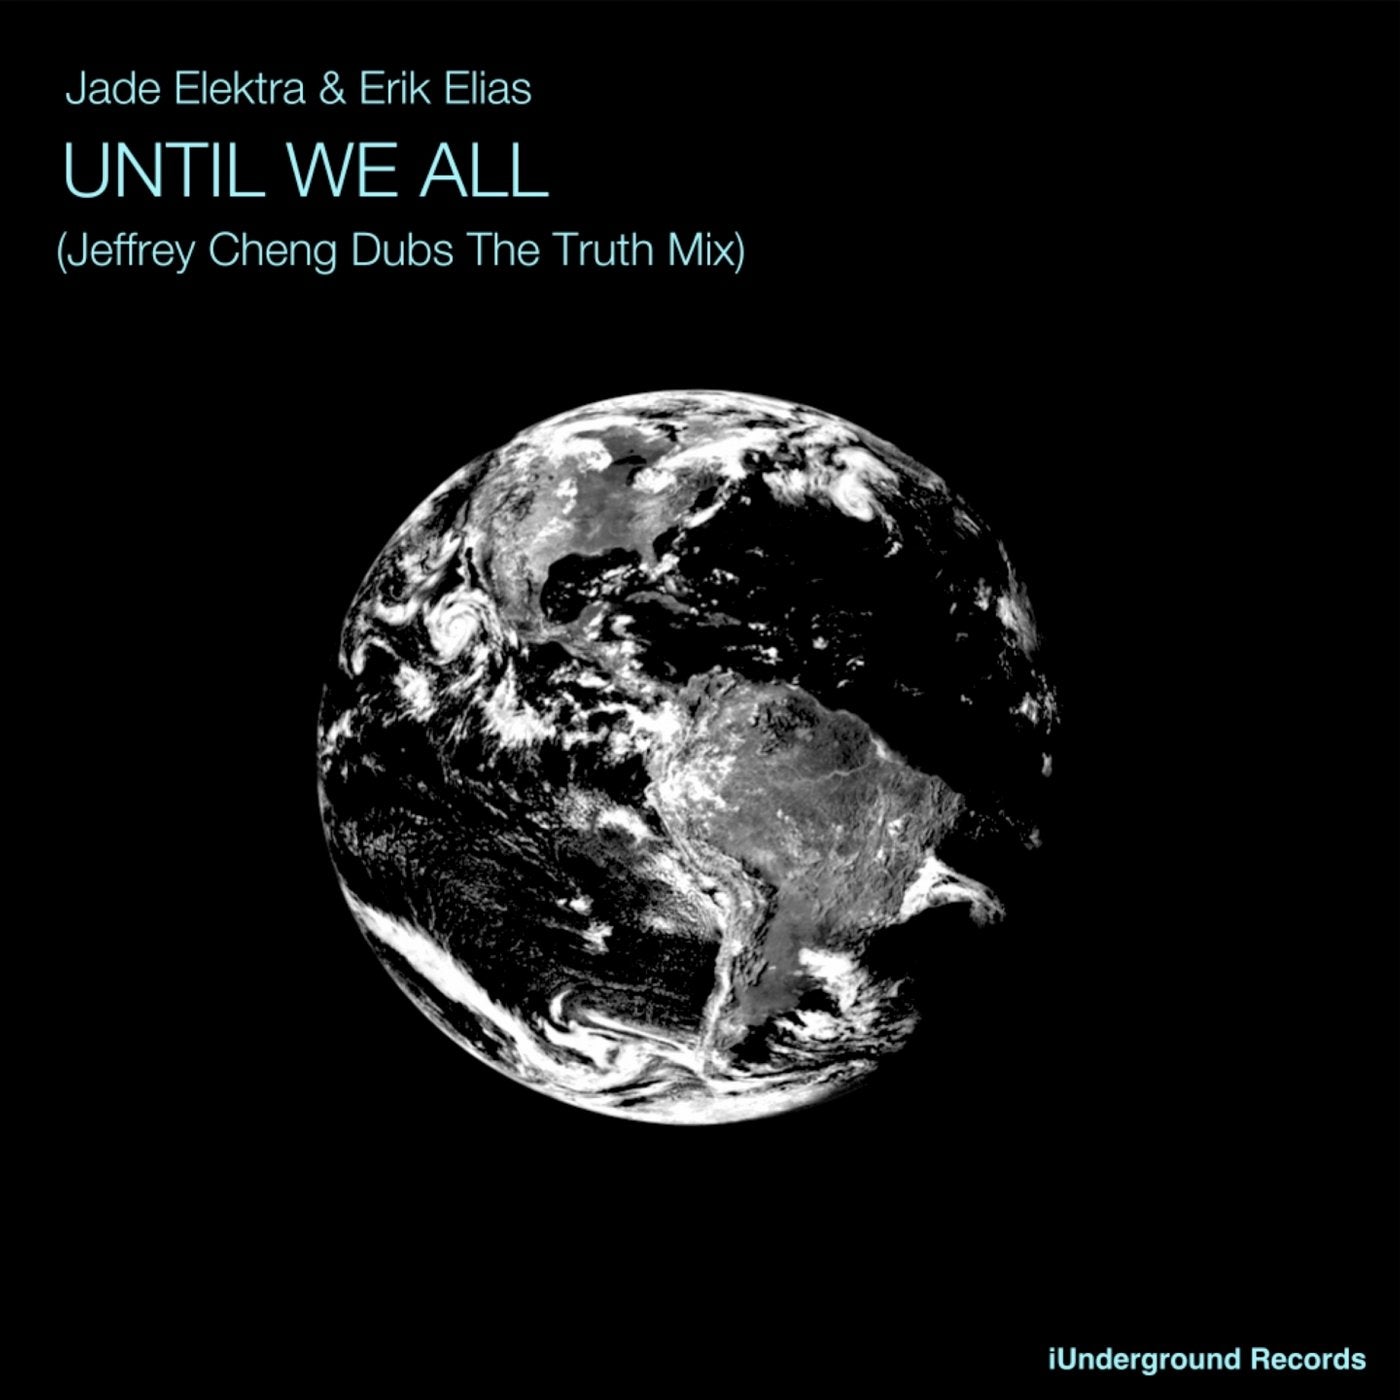 Until We All (Jeffrey Cheng Dubs the Truth Mix)